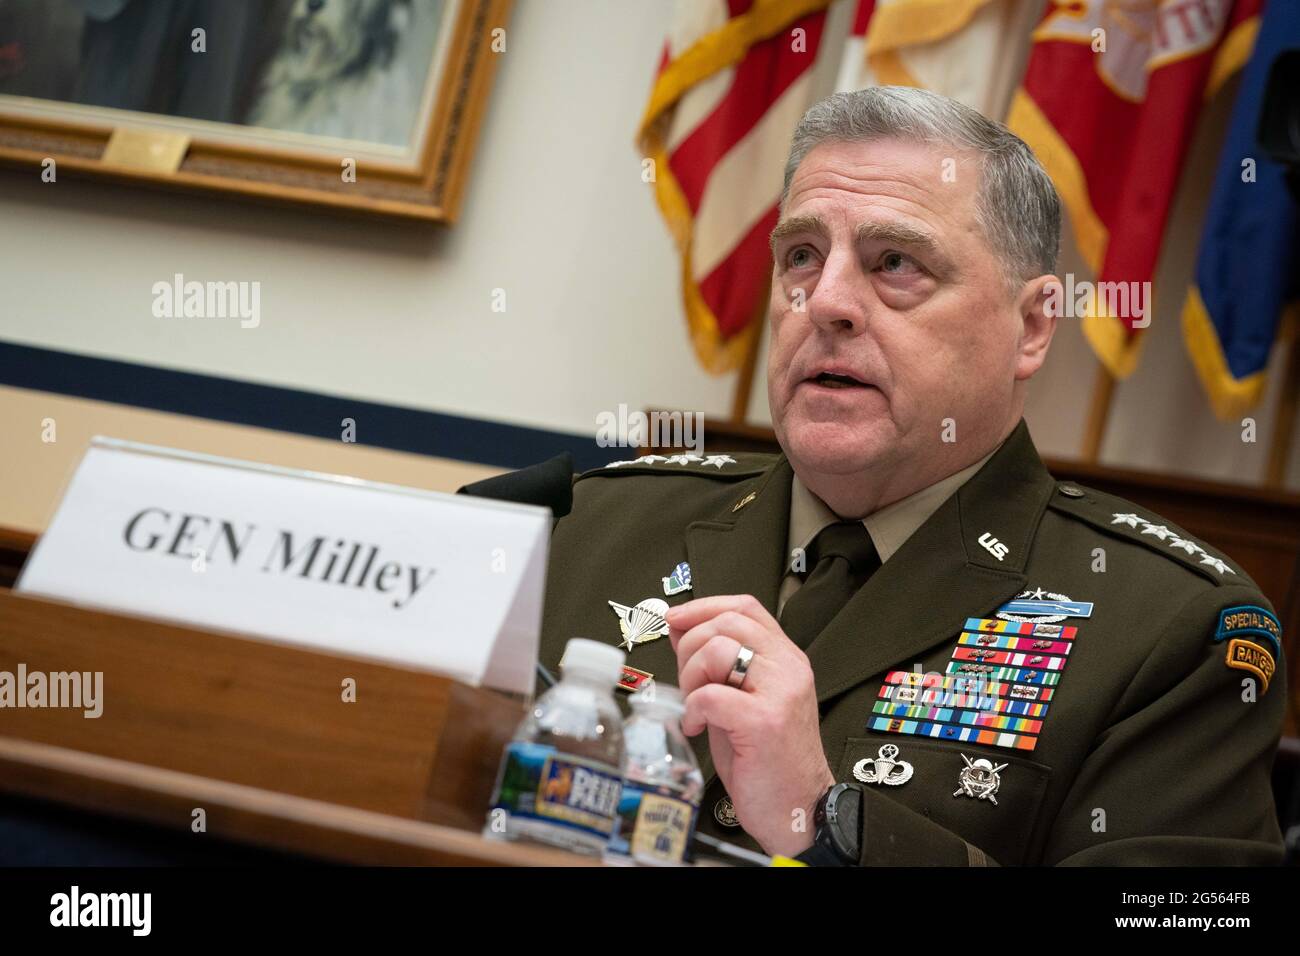 U.S. Army Gen. Mark A. Milley, chairman of the Joint Chiefs of Staff, testifies in Congress during a House Armed Services Committee budget hearing on Capitol Hill June 23, 2021 in Washington, D.C. Milley drew Republican ire after speaking in support of critical race theory. Stock Photo